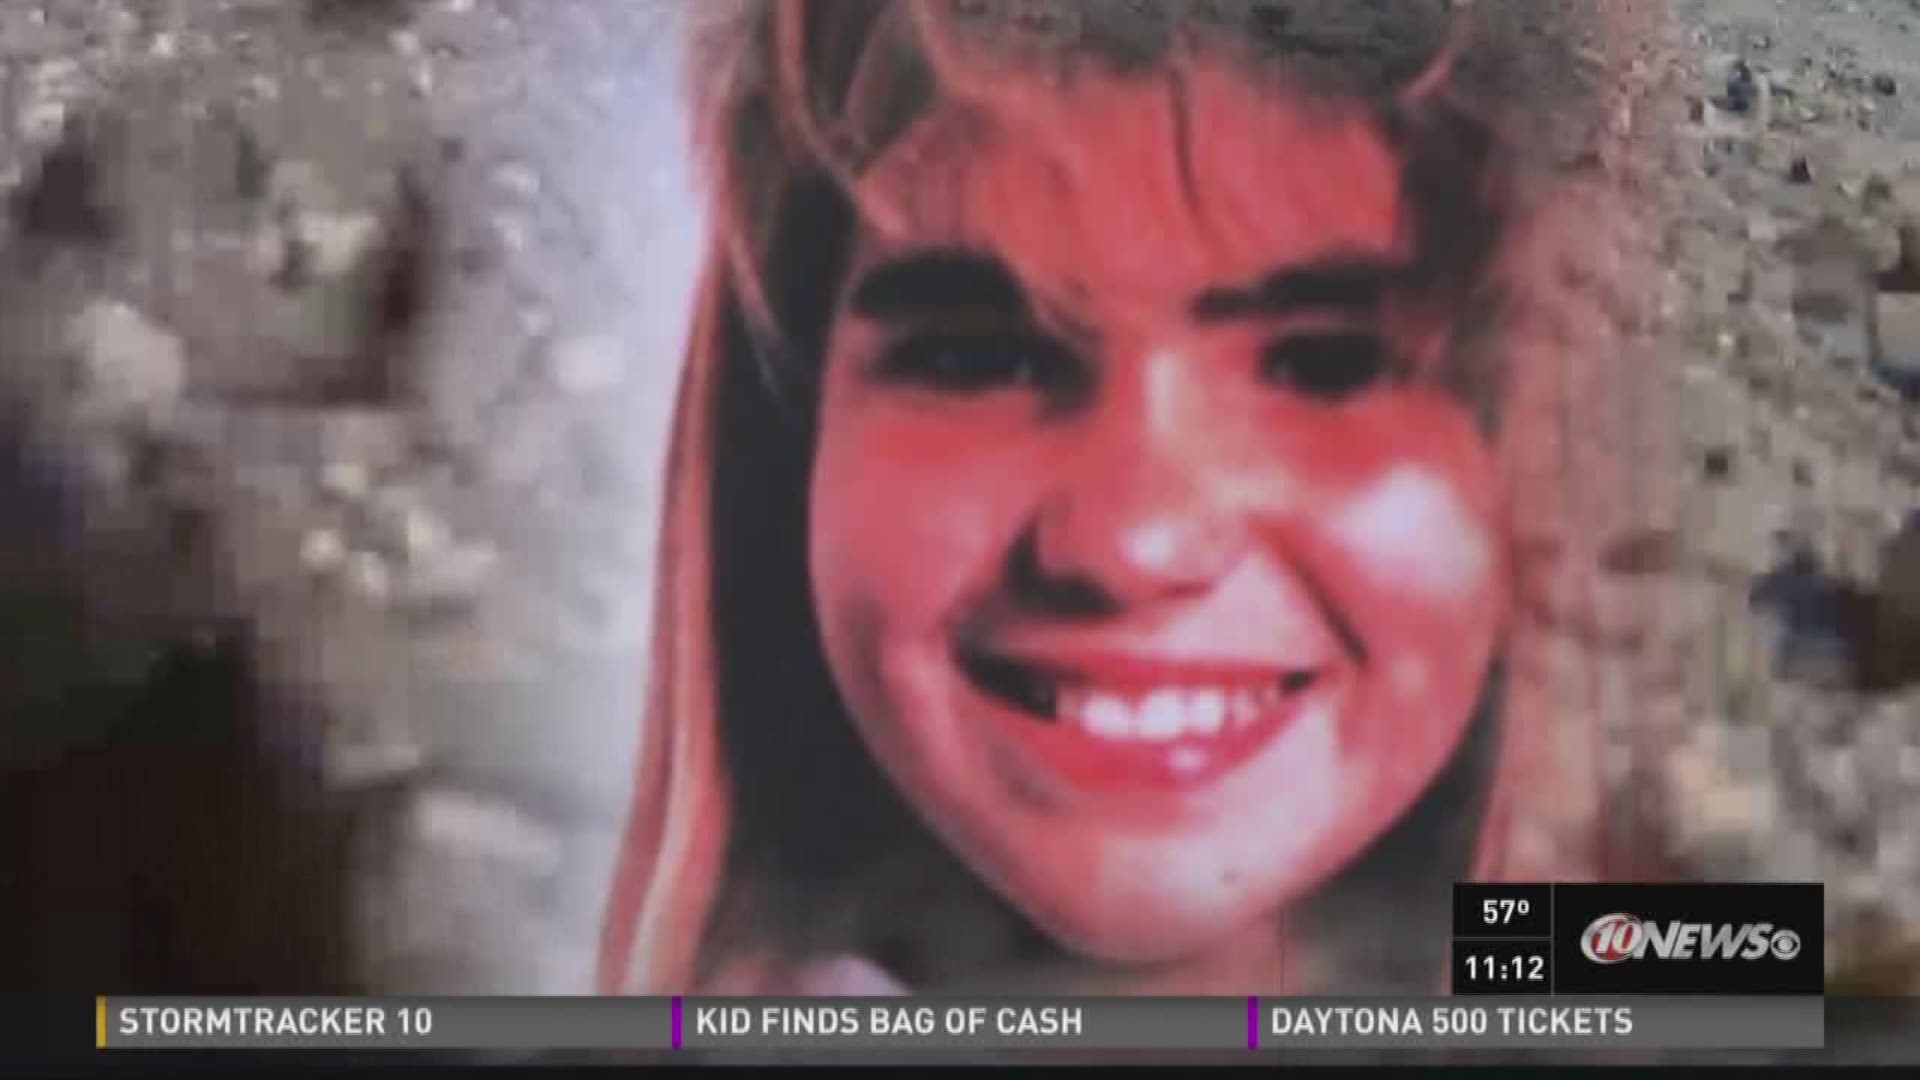 The 12-year-old girl was found in 1993 in Pasco County.